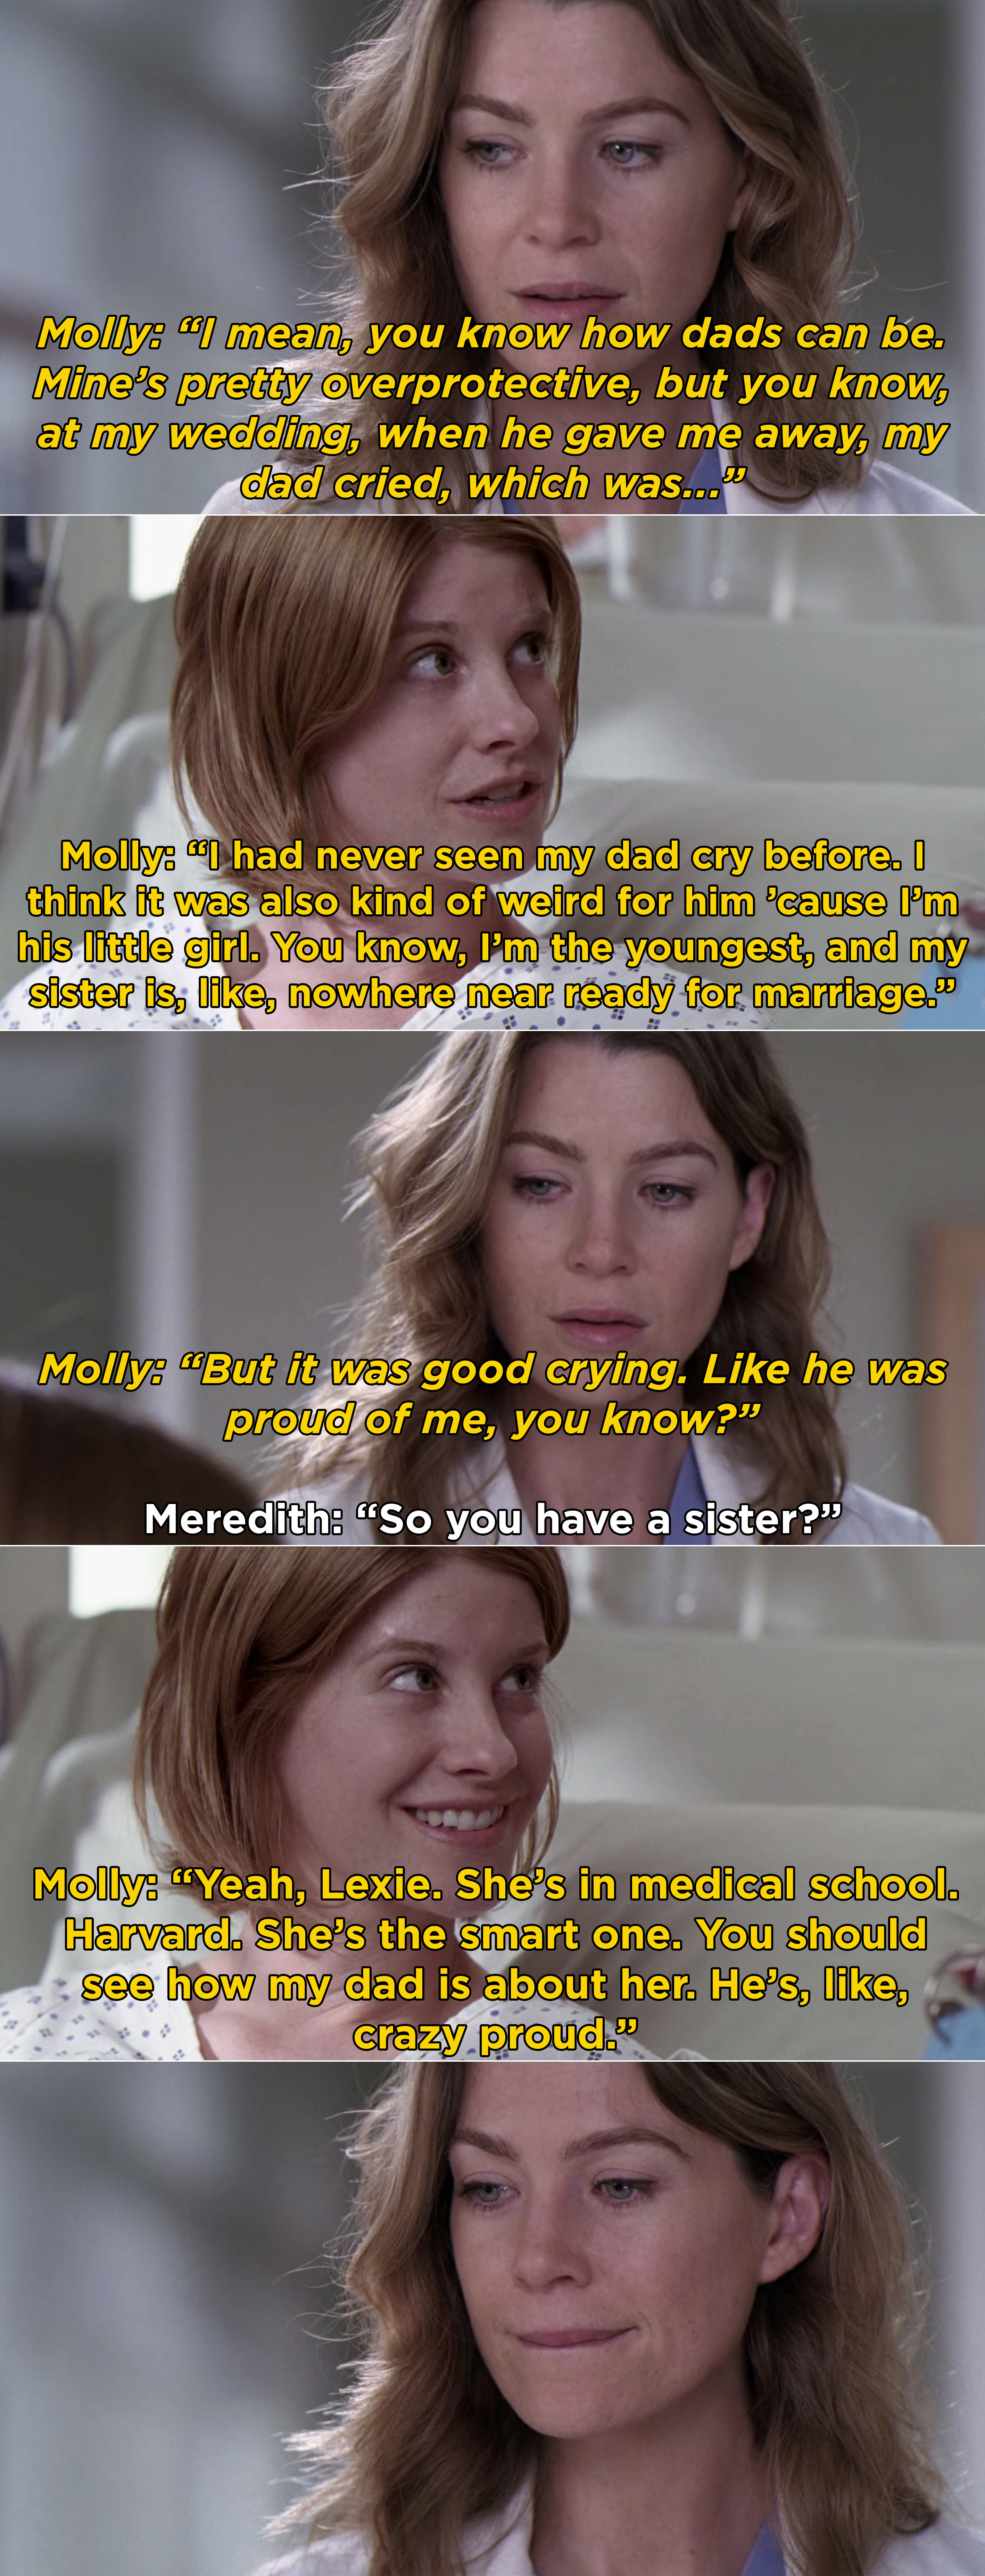 Molly telling Meredith how her dad cried at her wedding and how he&#x27;s so proud of her sister Lexie